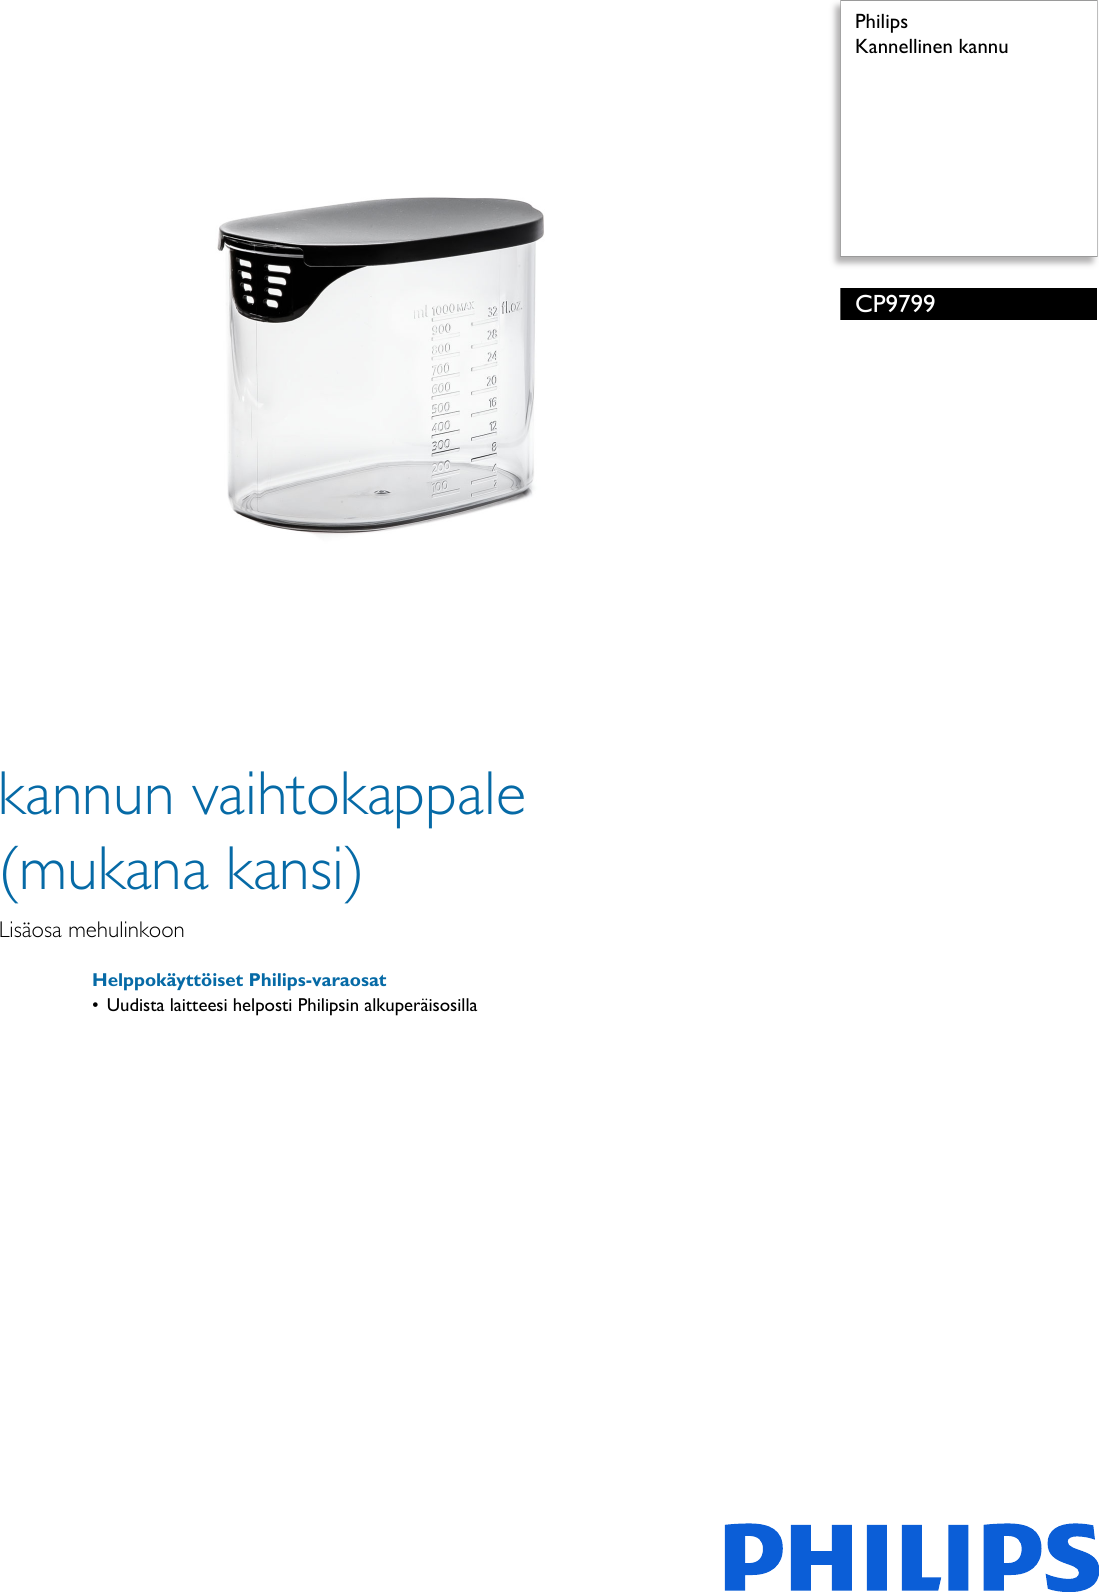 Page 1 of 2 - Philips CP9799 CP9799/01 Kannellinen Kannu User Manual Esite 01 Pss Finfi